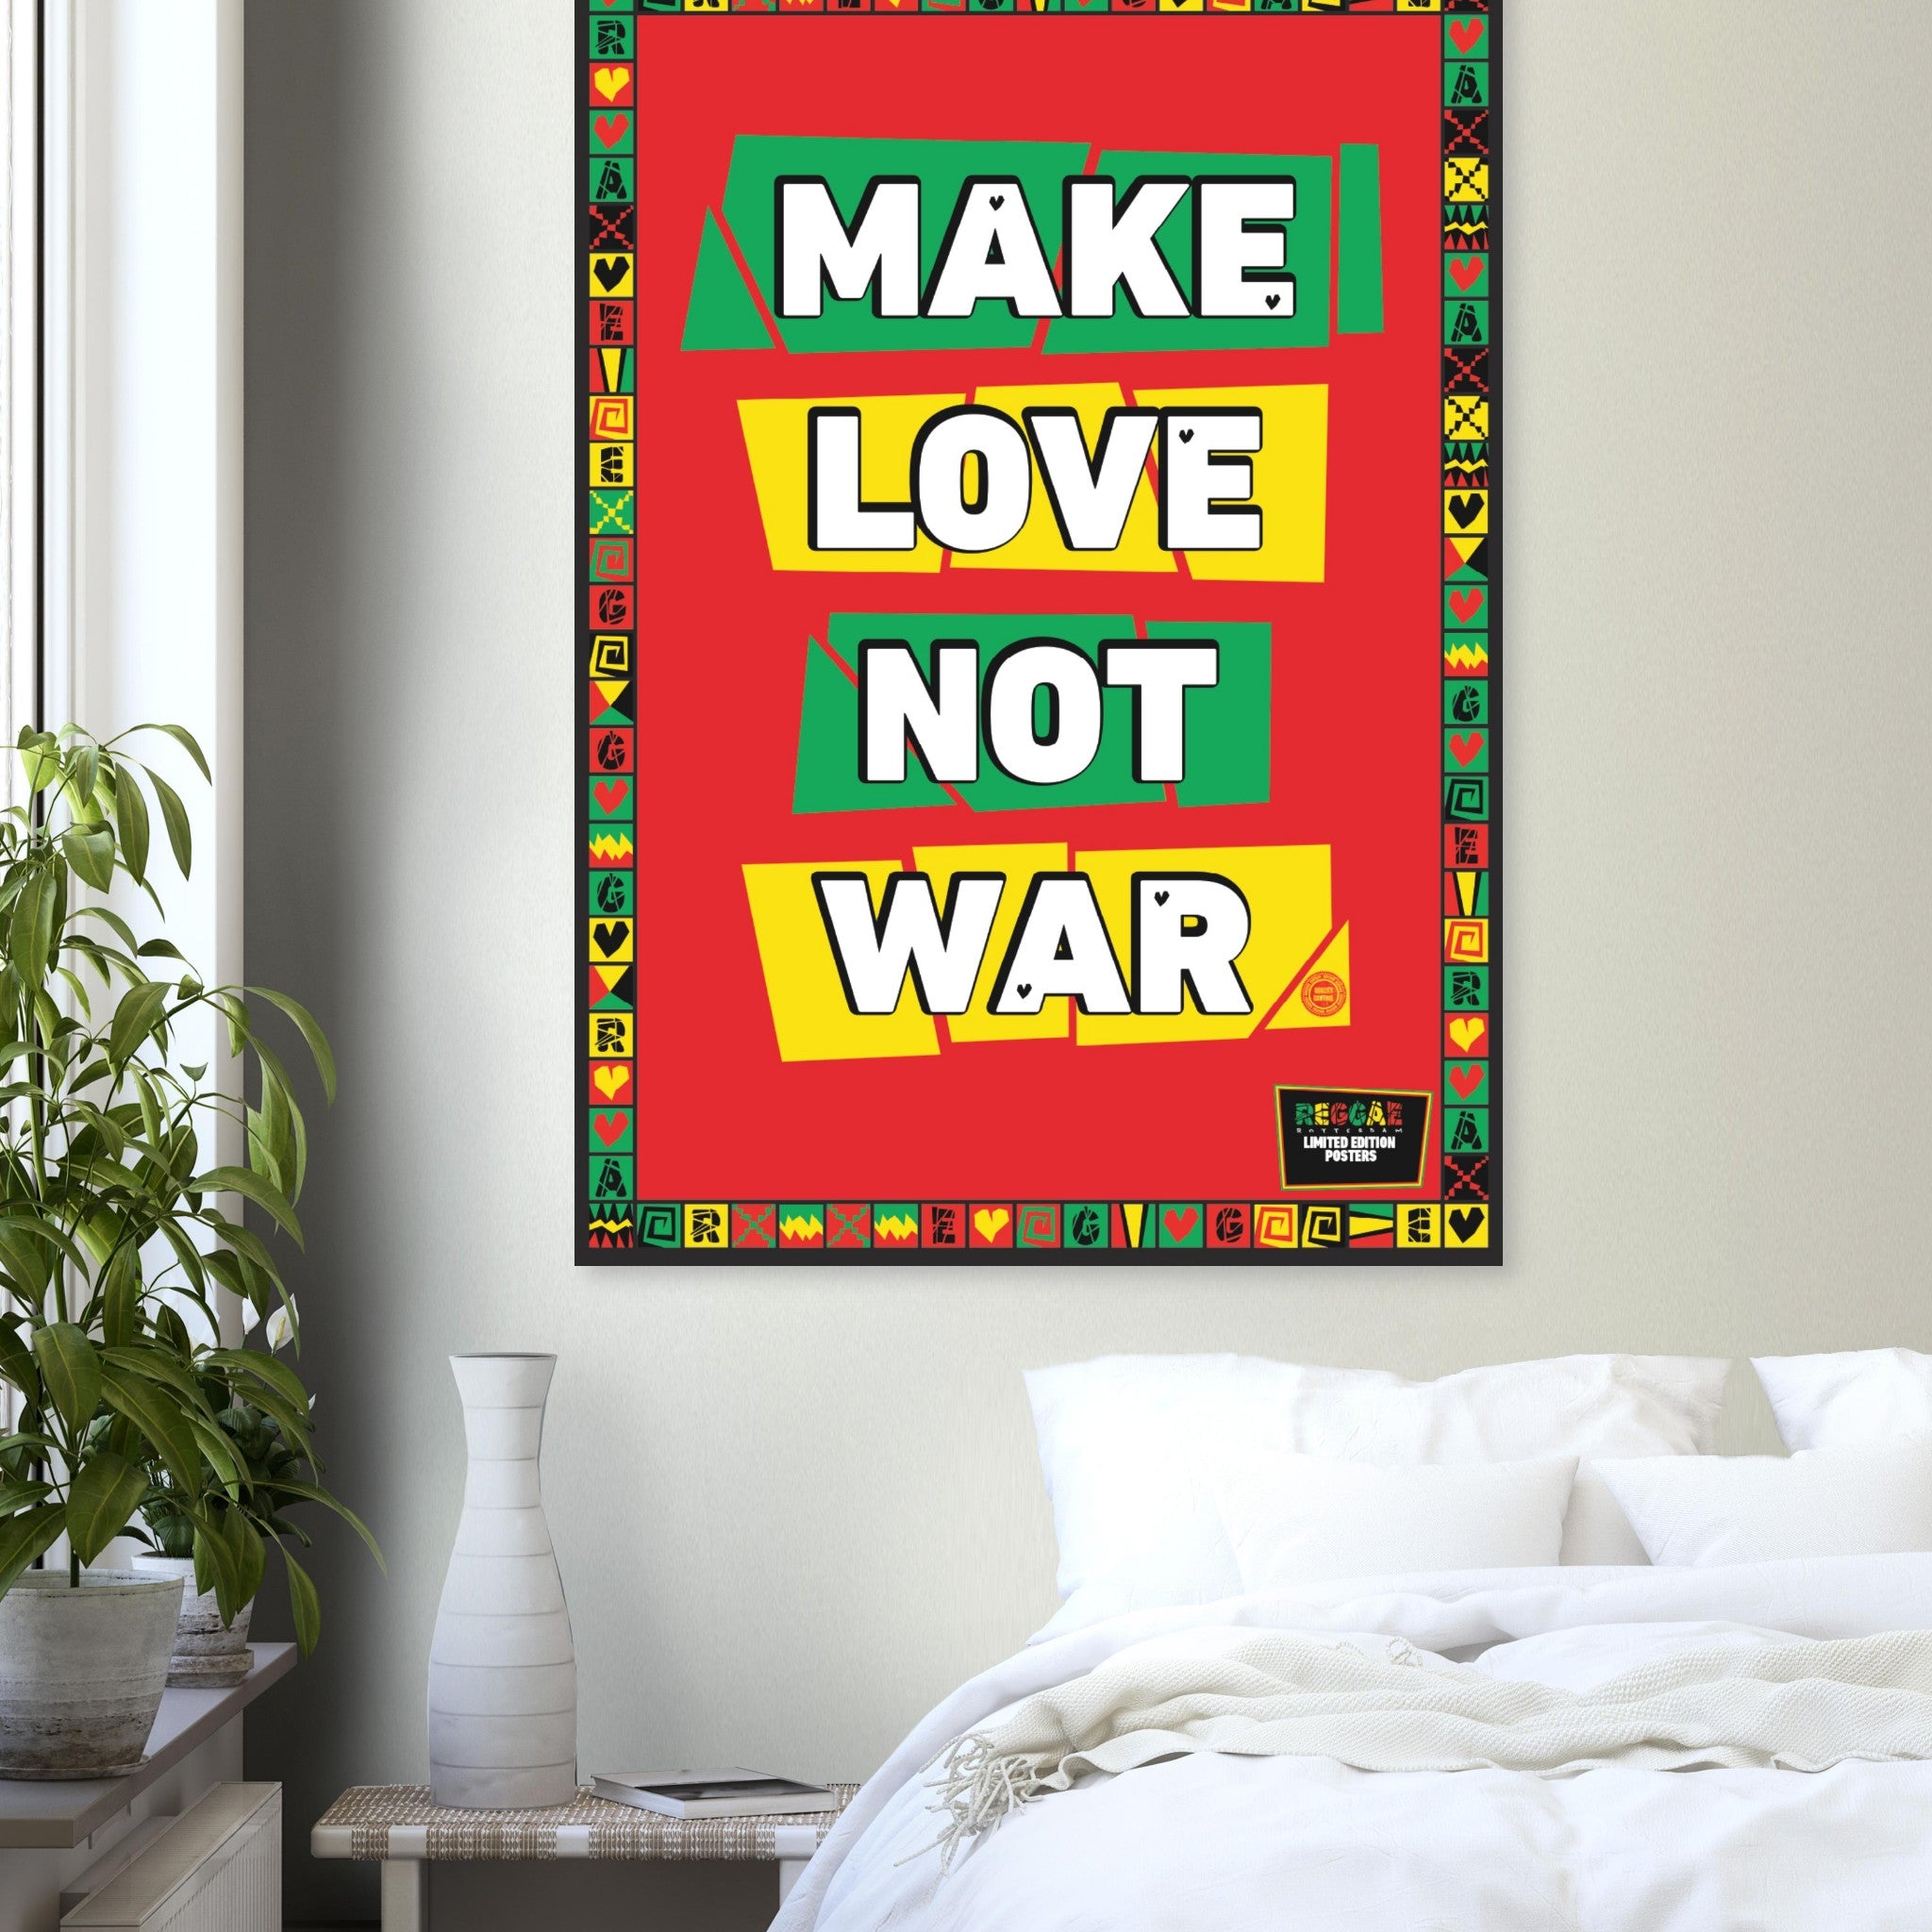 Make love Glossy Paper Poster